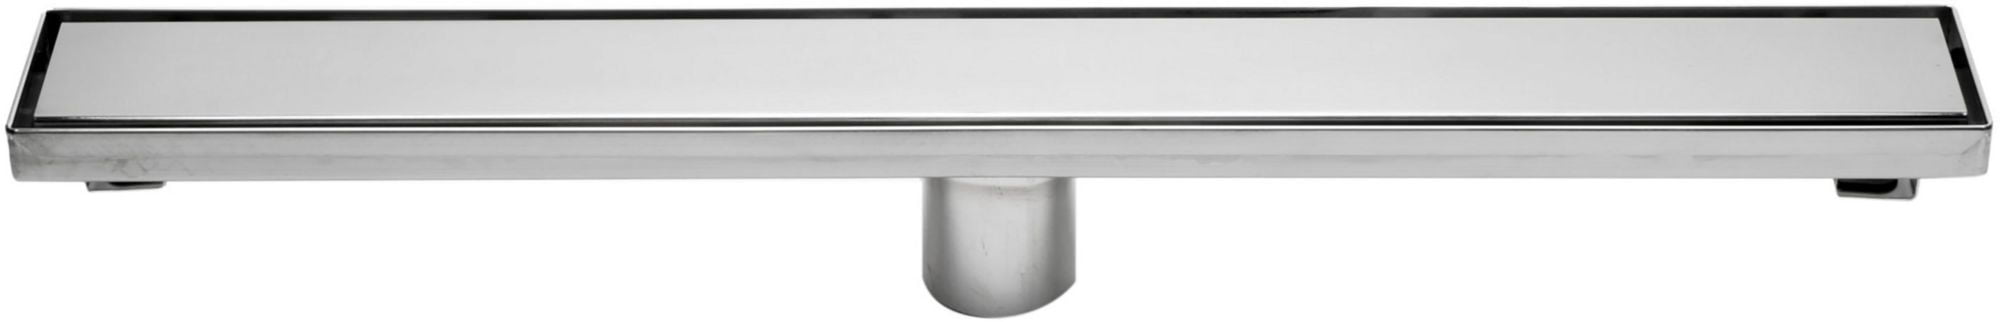 Abld24b-pss Modern Polished Stainless Steel Linear Shower Drain With Solid Cover - 24 In.